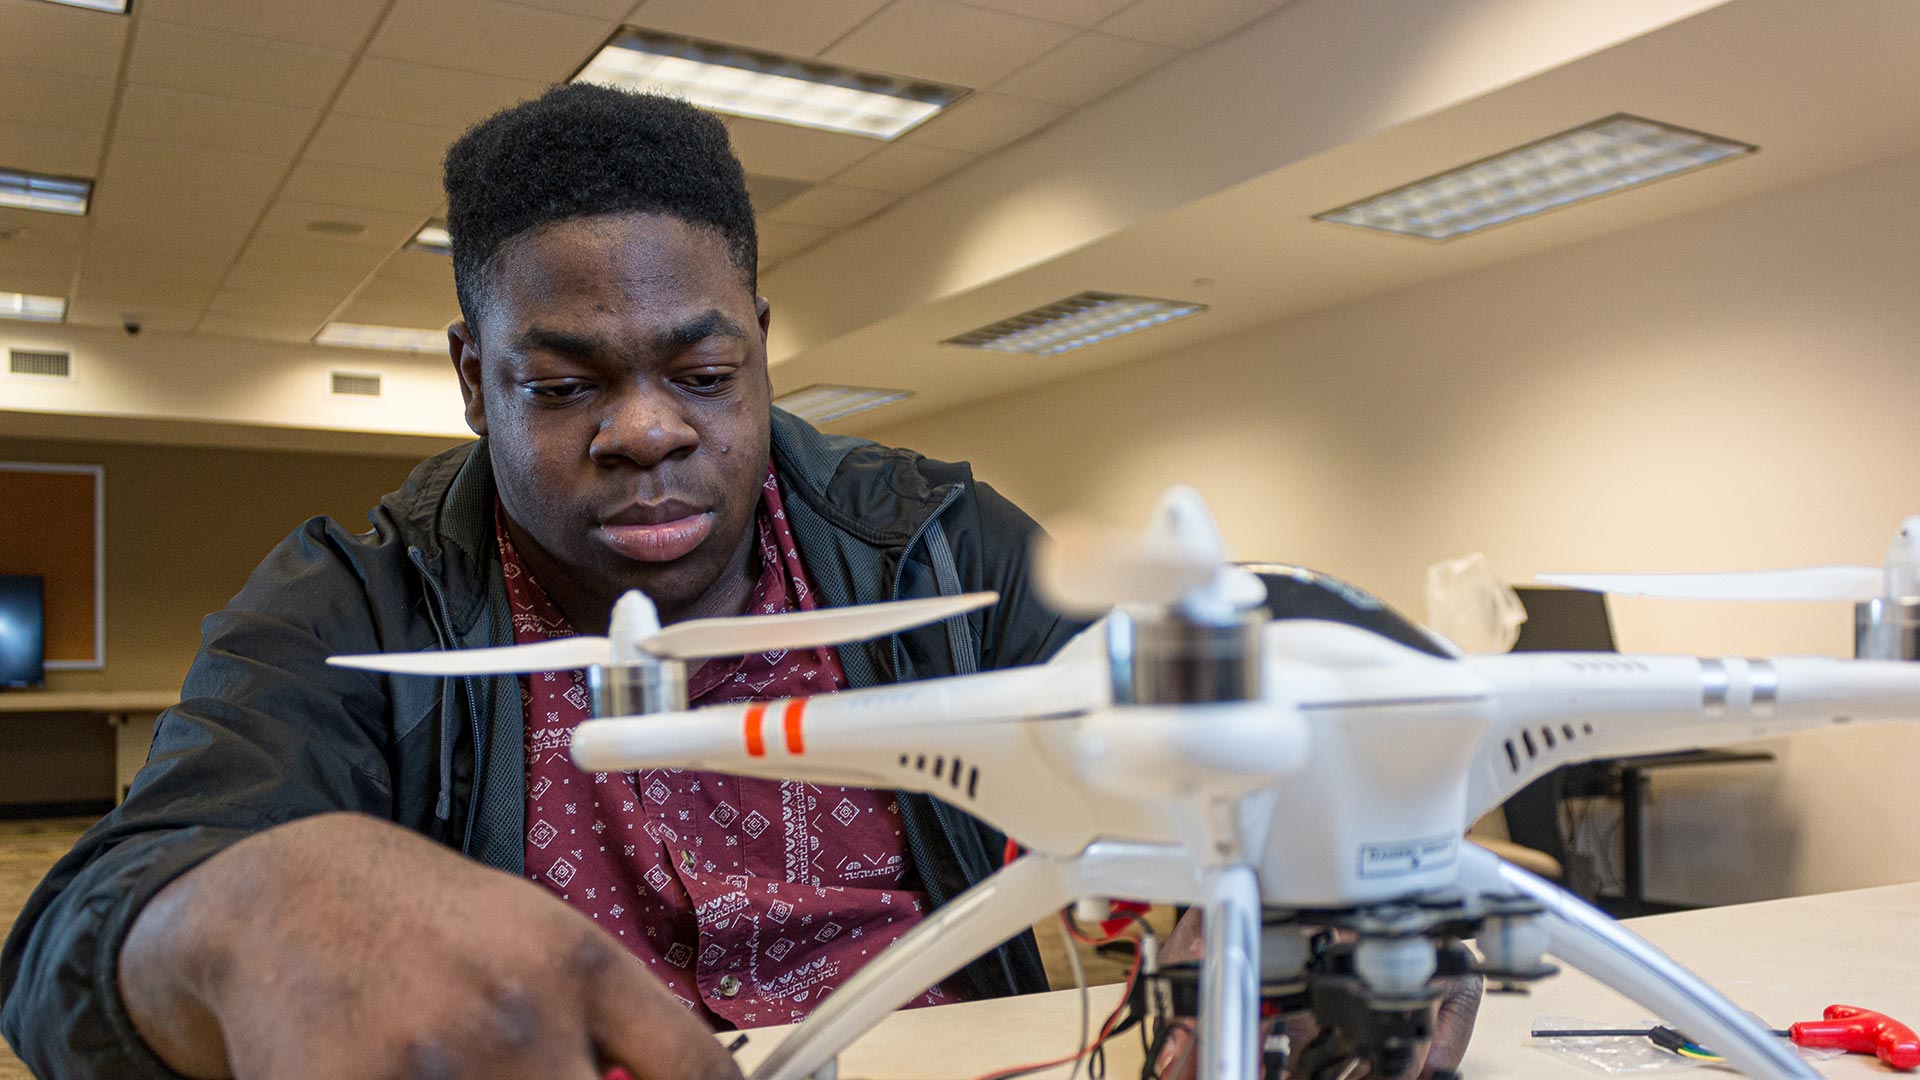 Male student working with drone - emerging tech